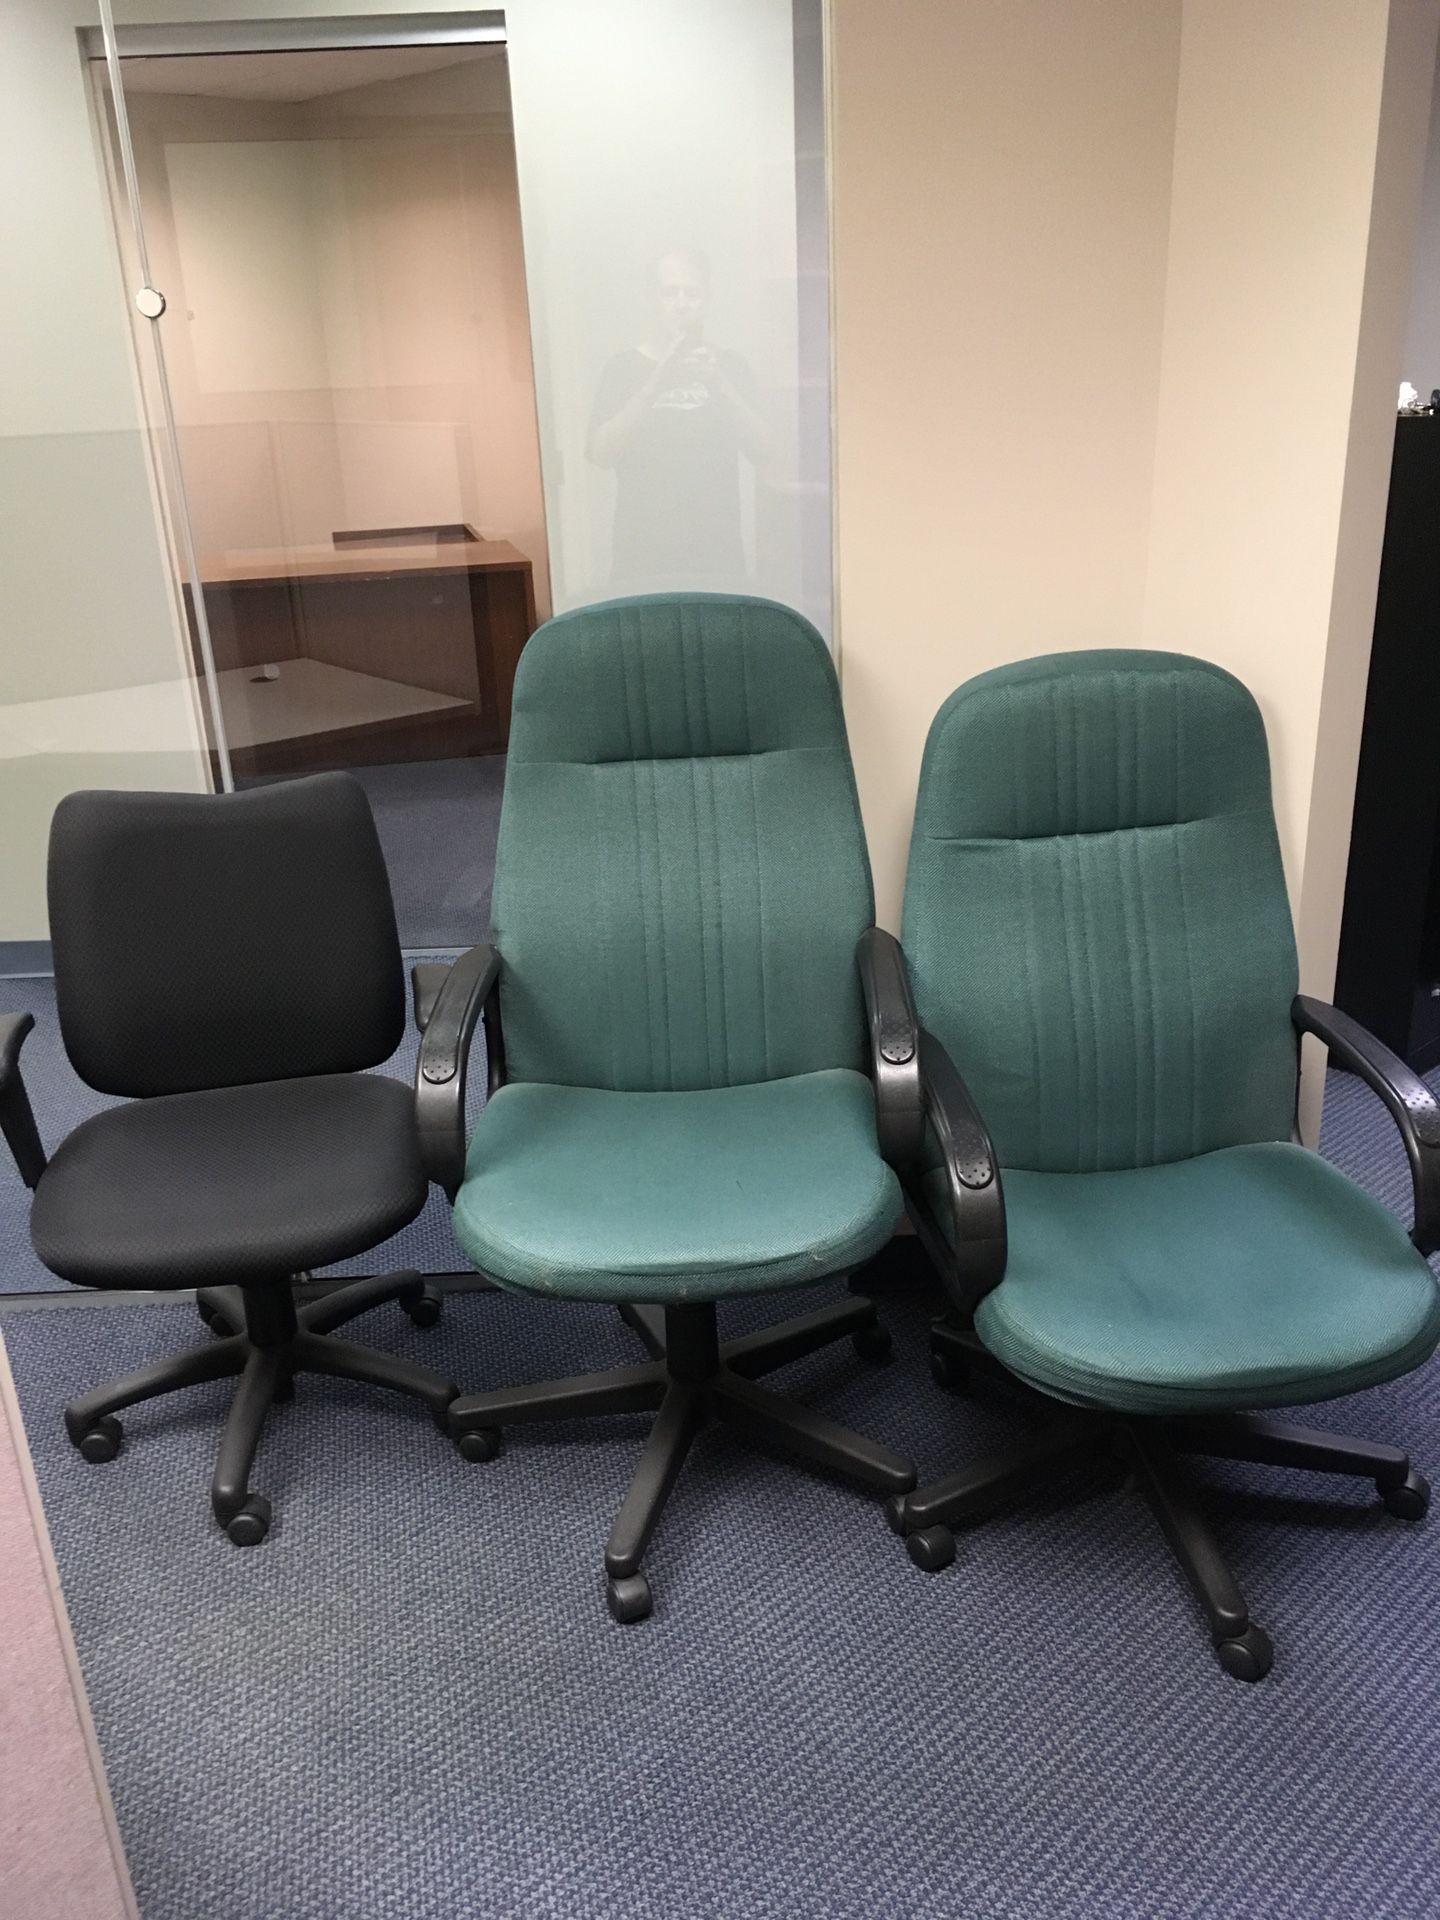 Office Chairs - $15 each